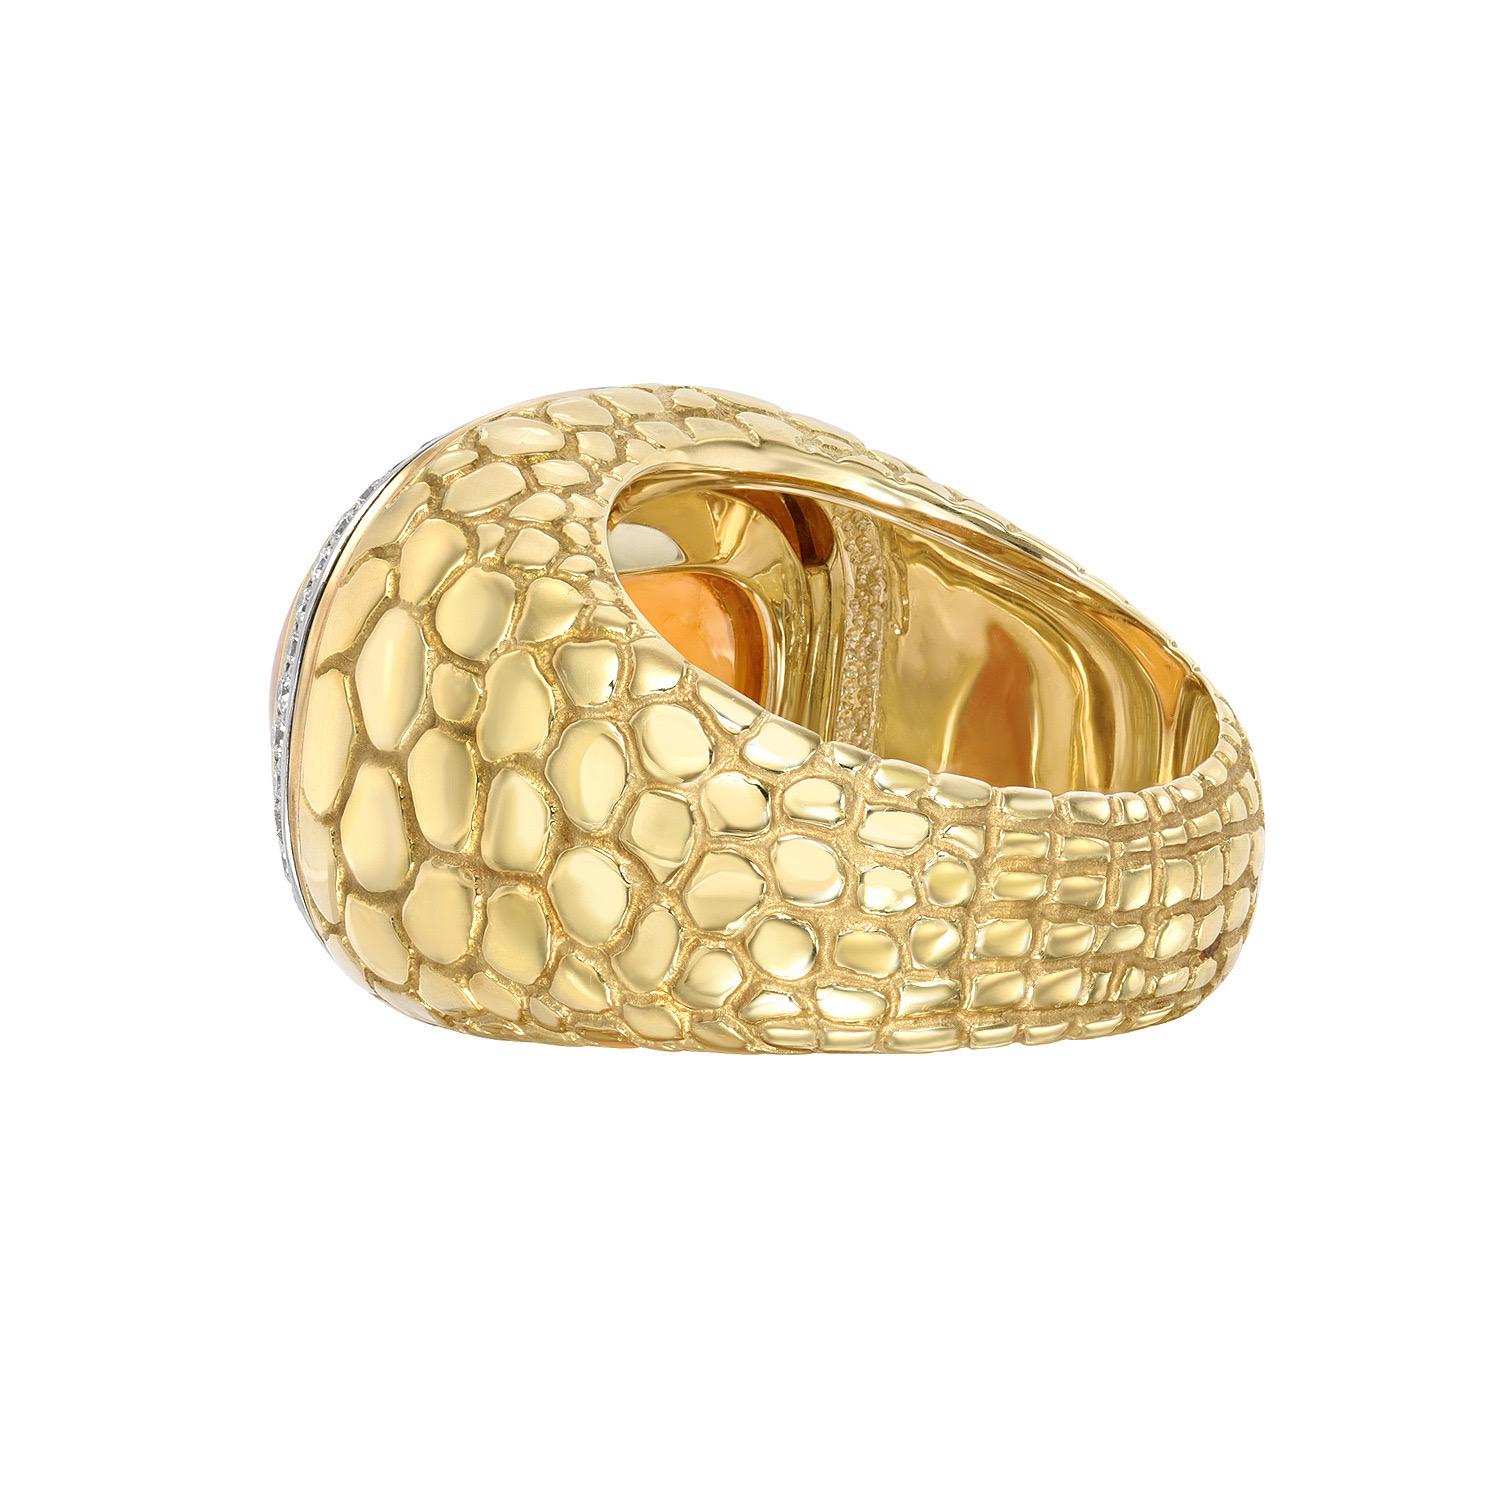 18K yellow gold and platinum Crocodile pattern ring featuring an incredible 29.93 carat Mandarin Garnet Sugarloaf Cabochon surrounded by a total of 0.40 carat round brilliant diamonds.
Ring size 6. Resizing is complimentary upon request.
Returns are